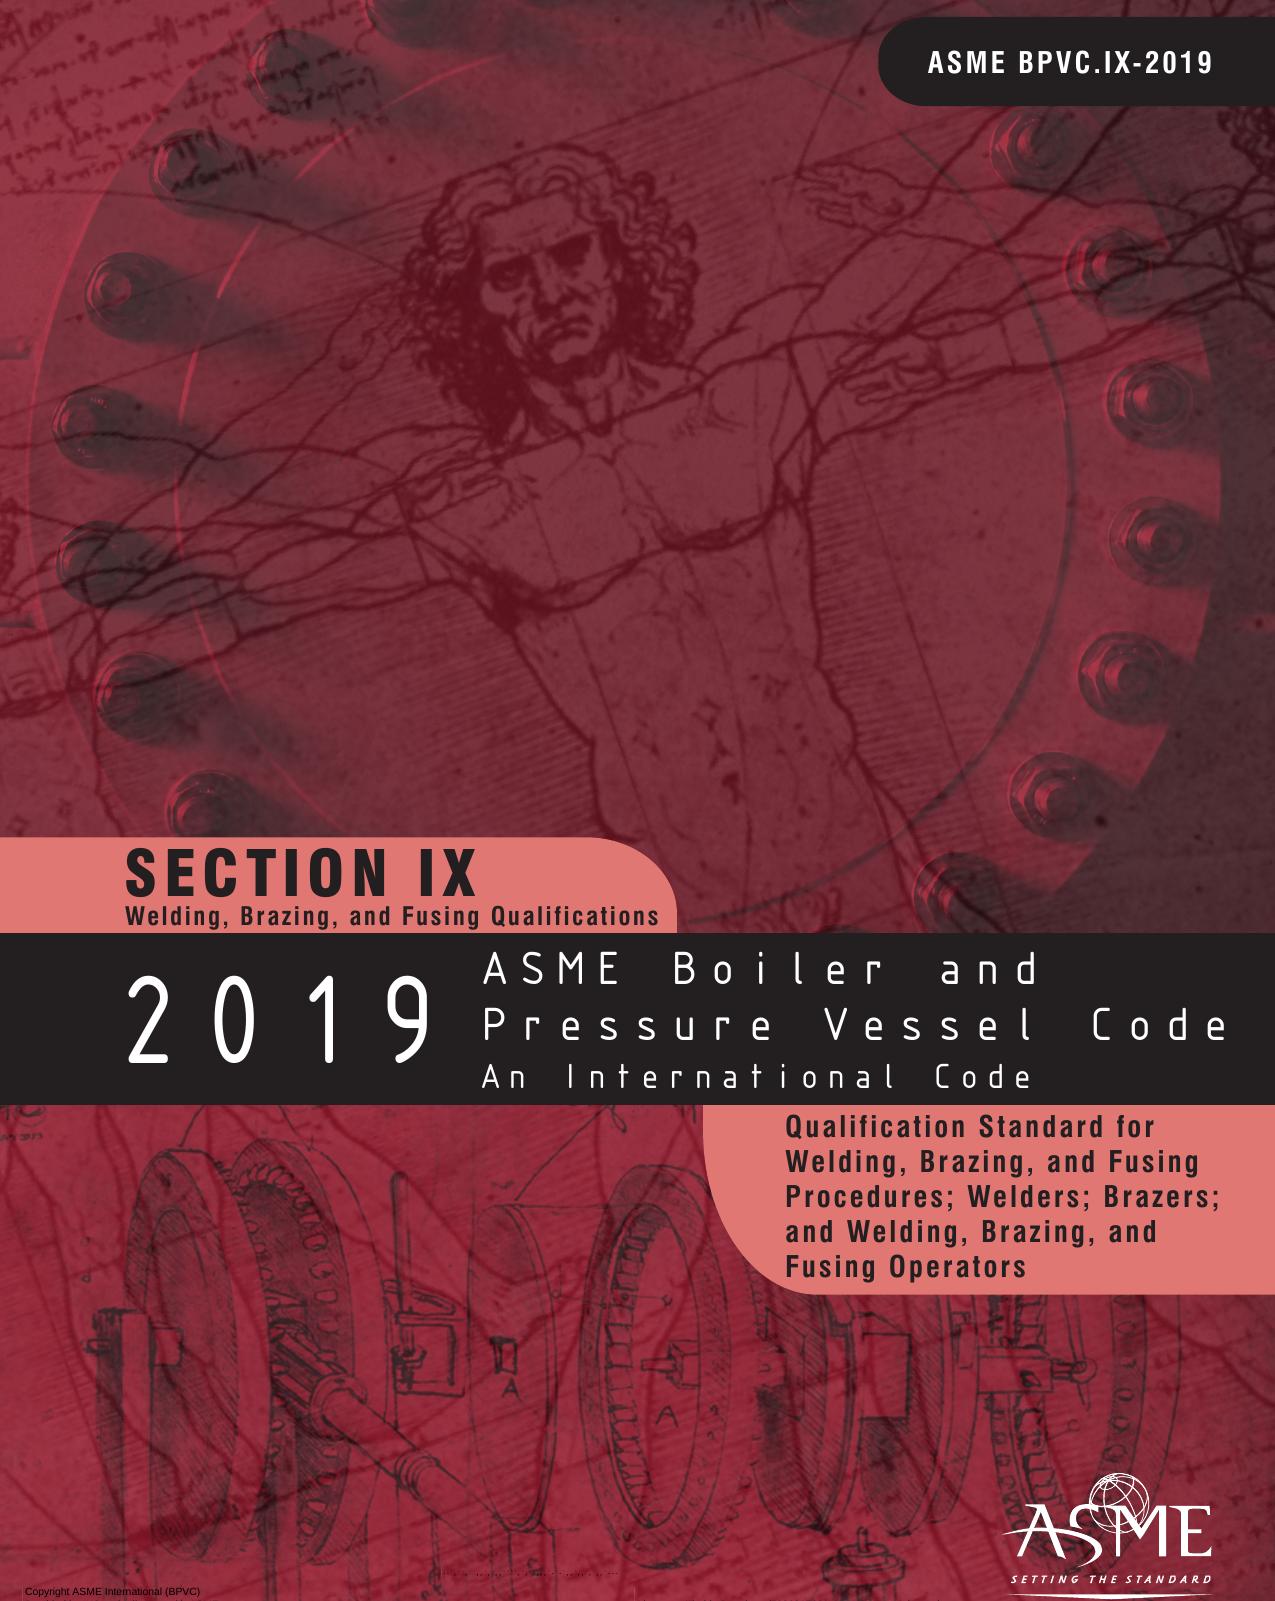 ASME boiler & pressure vessel code. Section IX, Qualification standard for welding, brazing, and fusing procedures; welders; brazers; and welding, brazing, and fusing operators : an international code